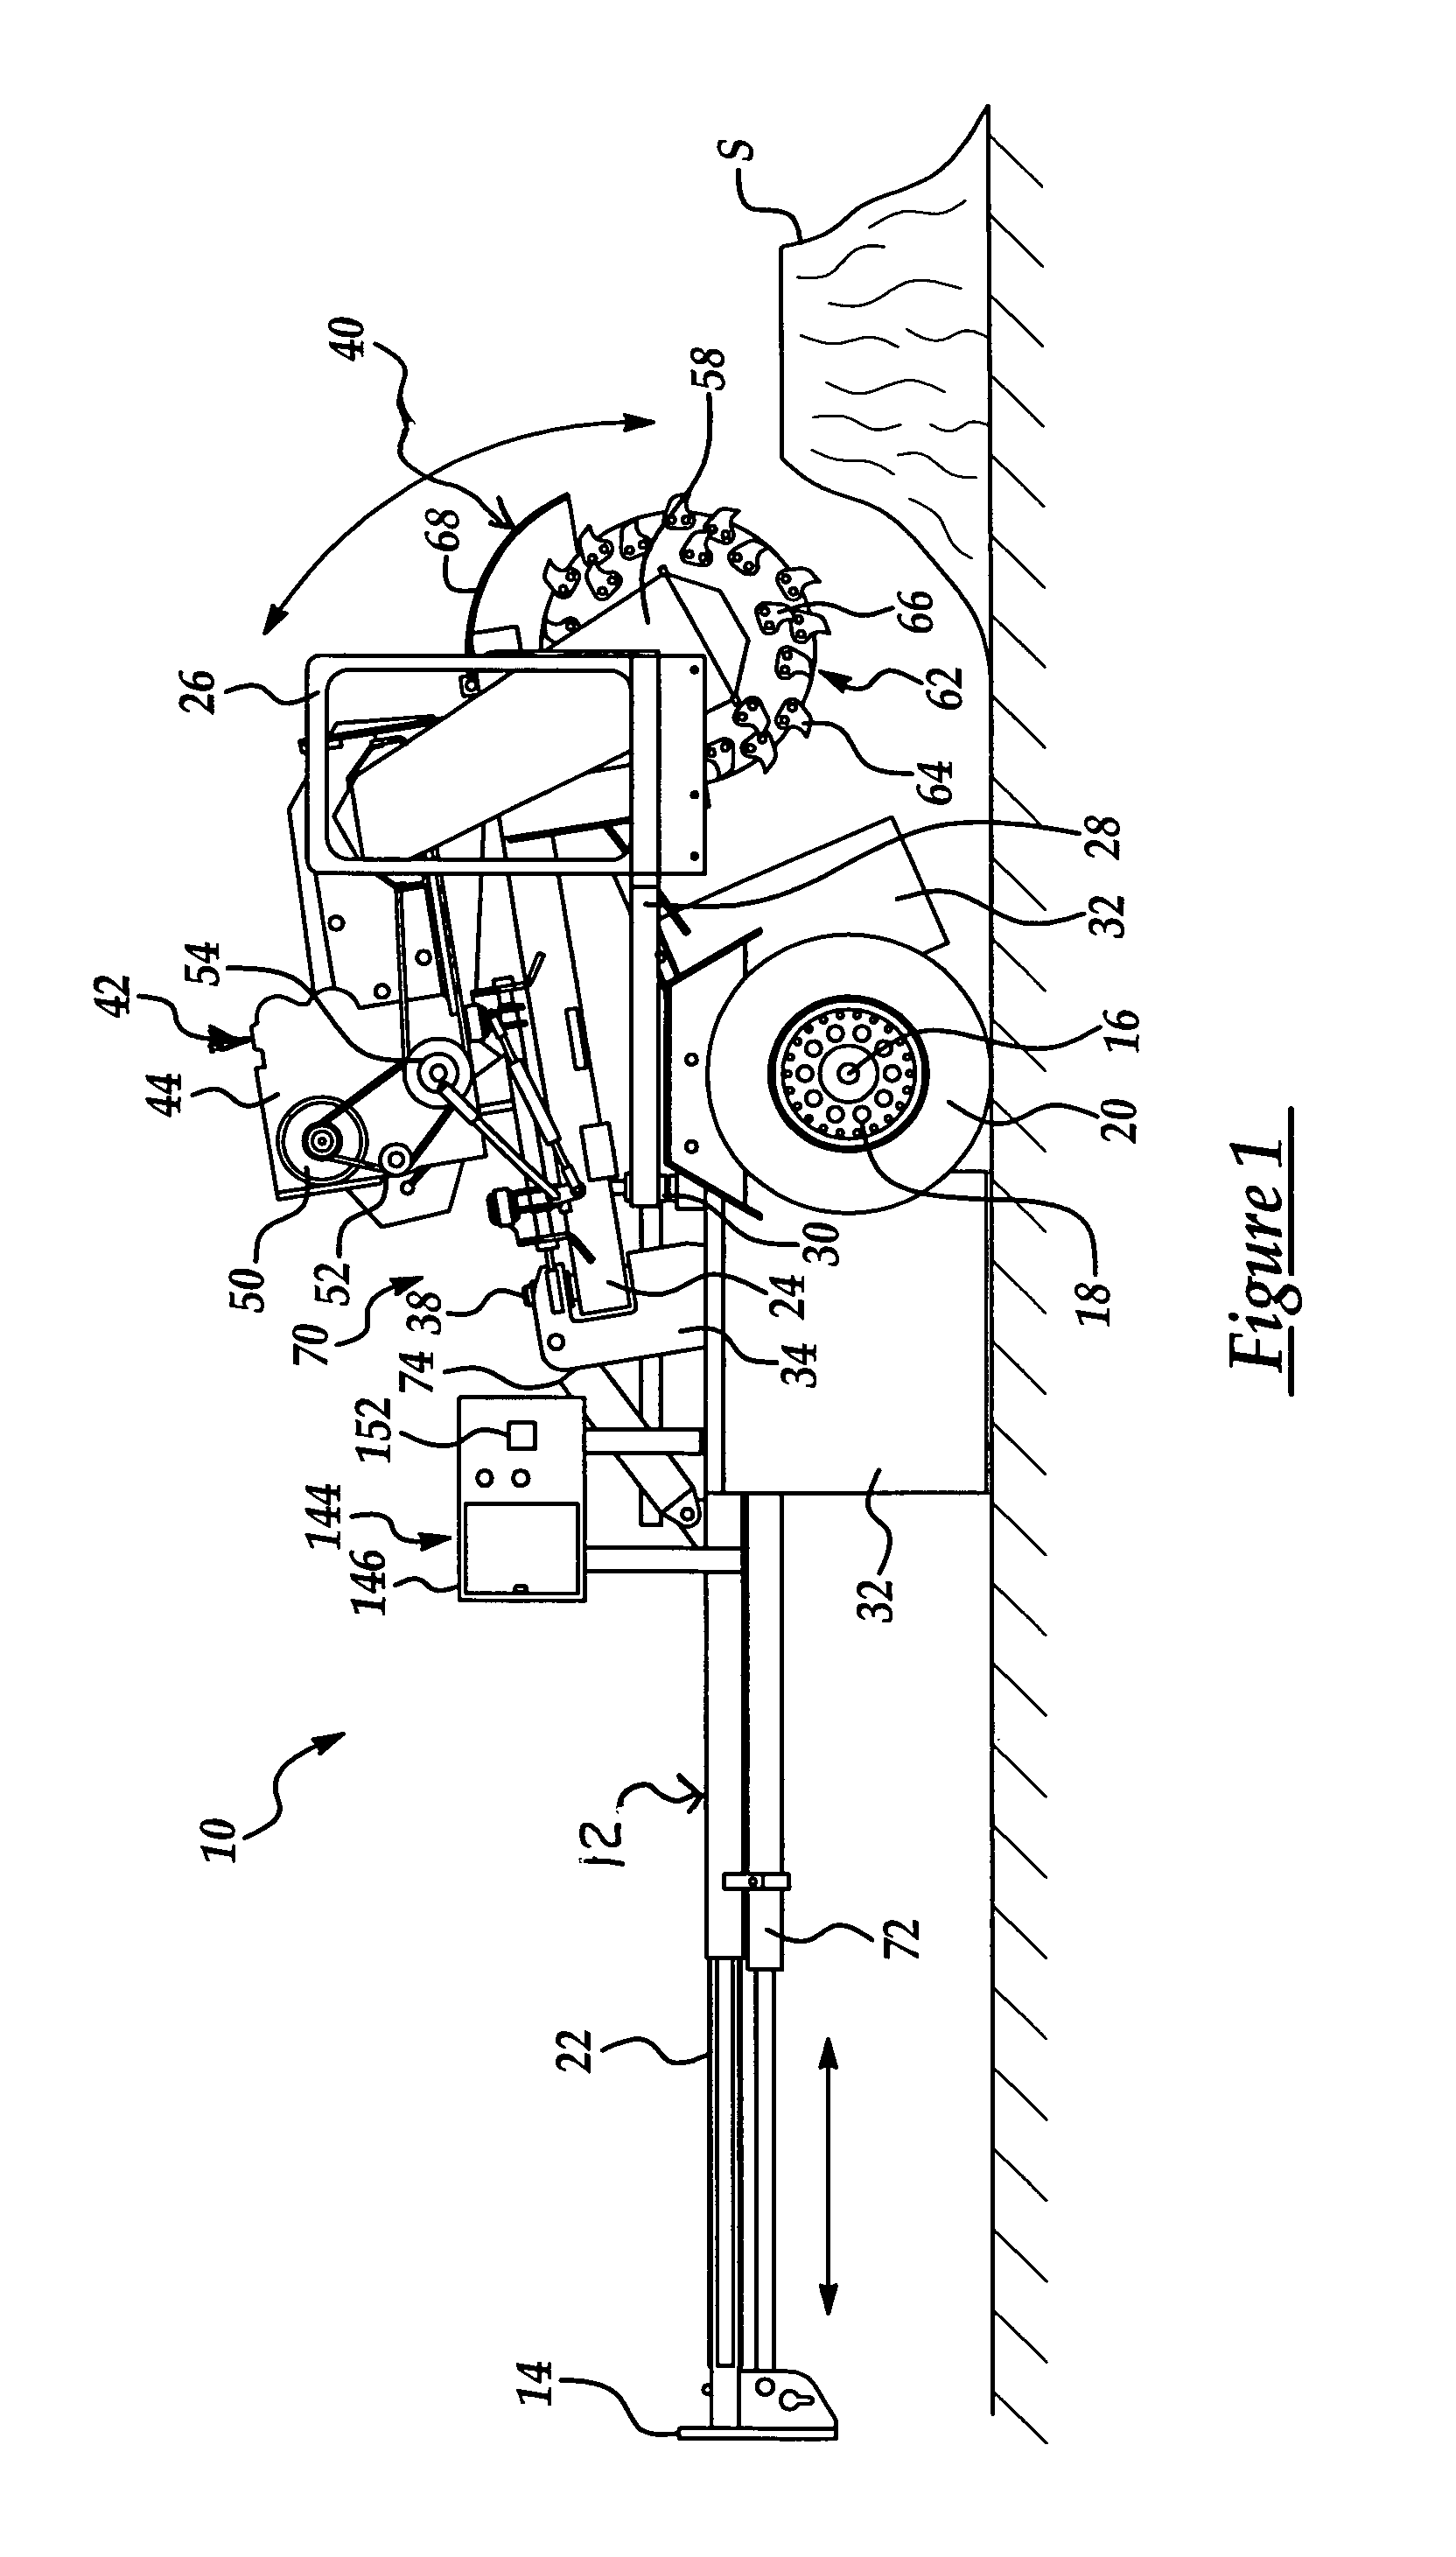 Stump grinder having automatic reversing feed assembly